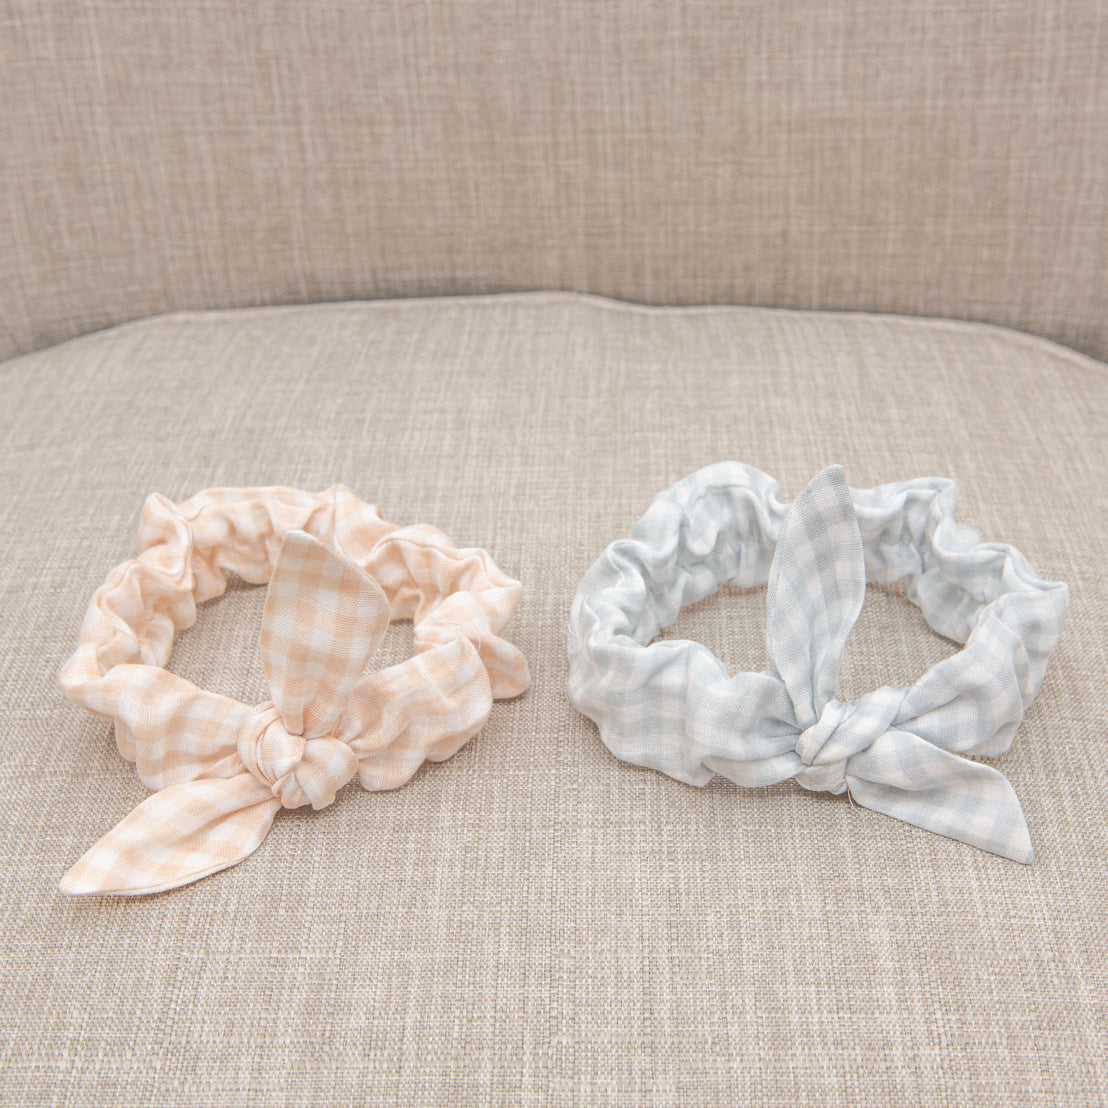 Two Isla Tie Headbands on a beige sofa, one plain peach and the other light blue checkered, both with decorative knots in a vintage style.